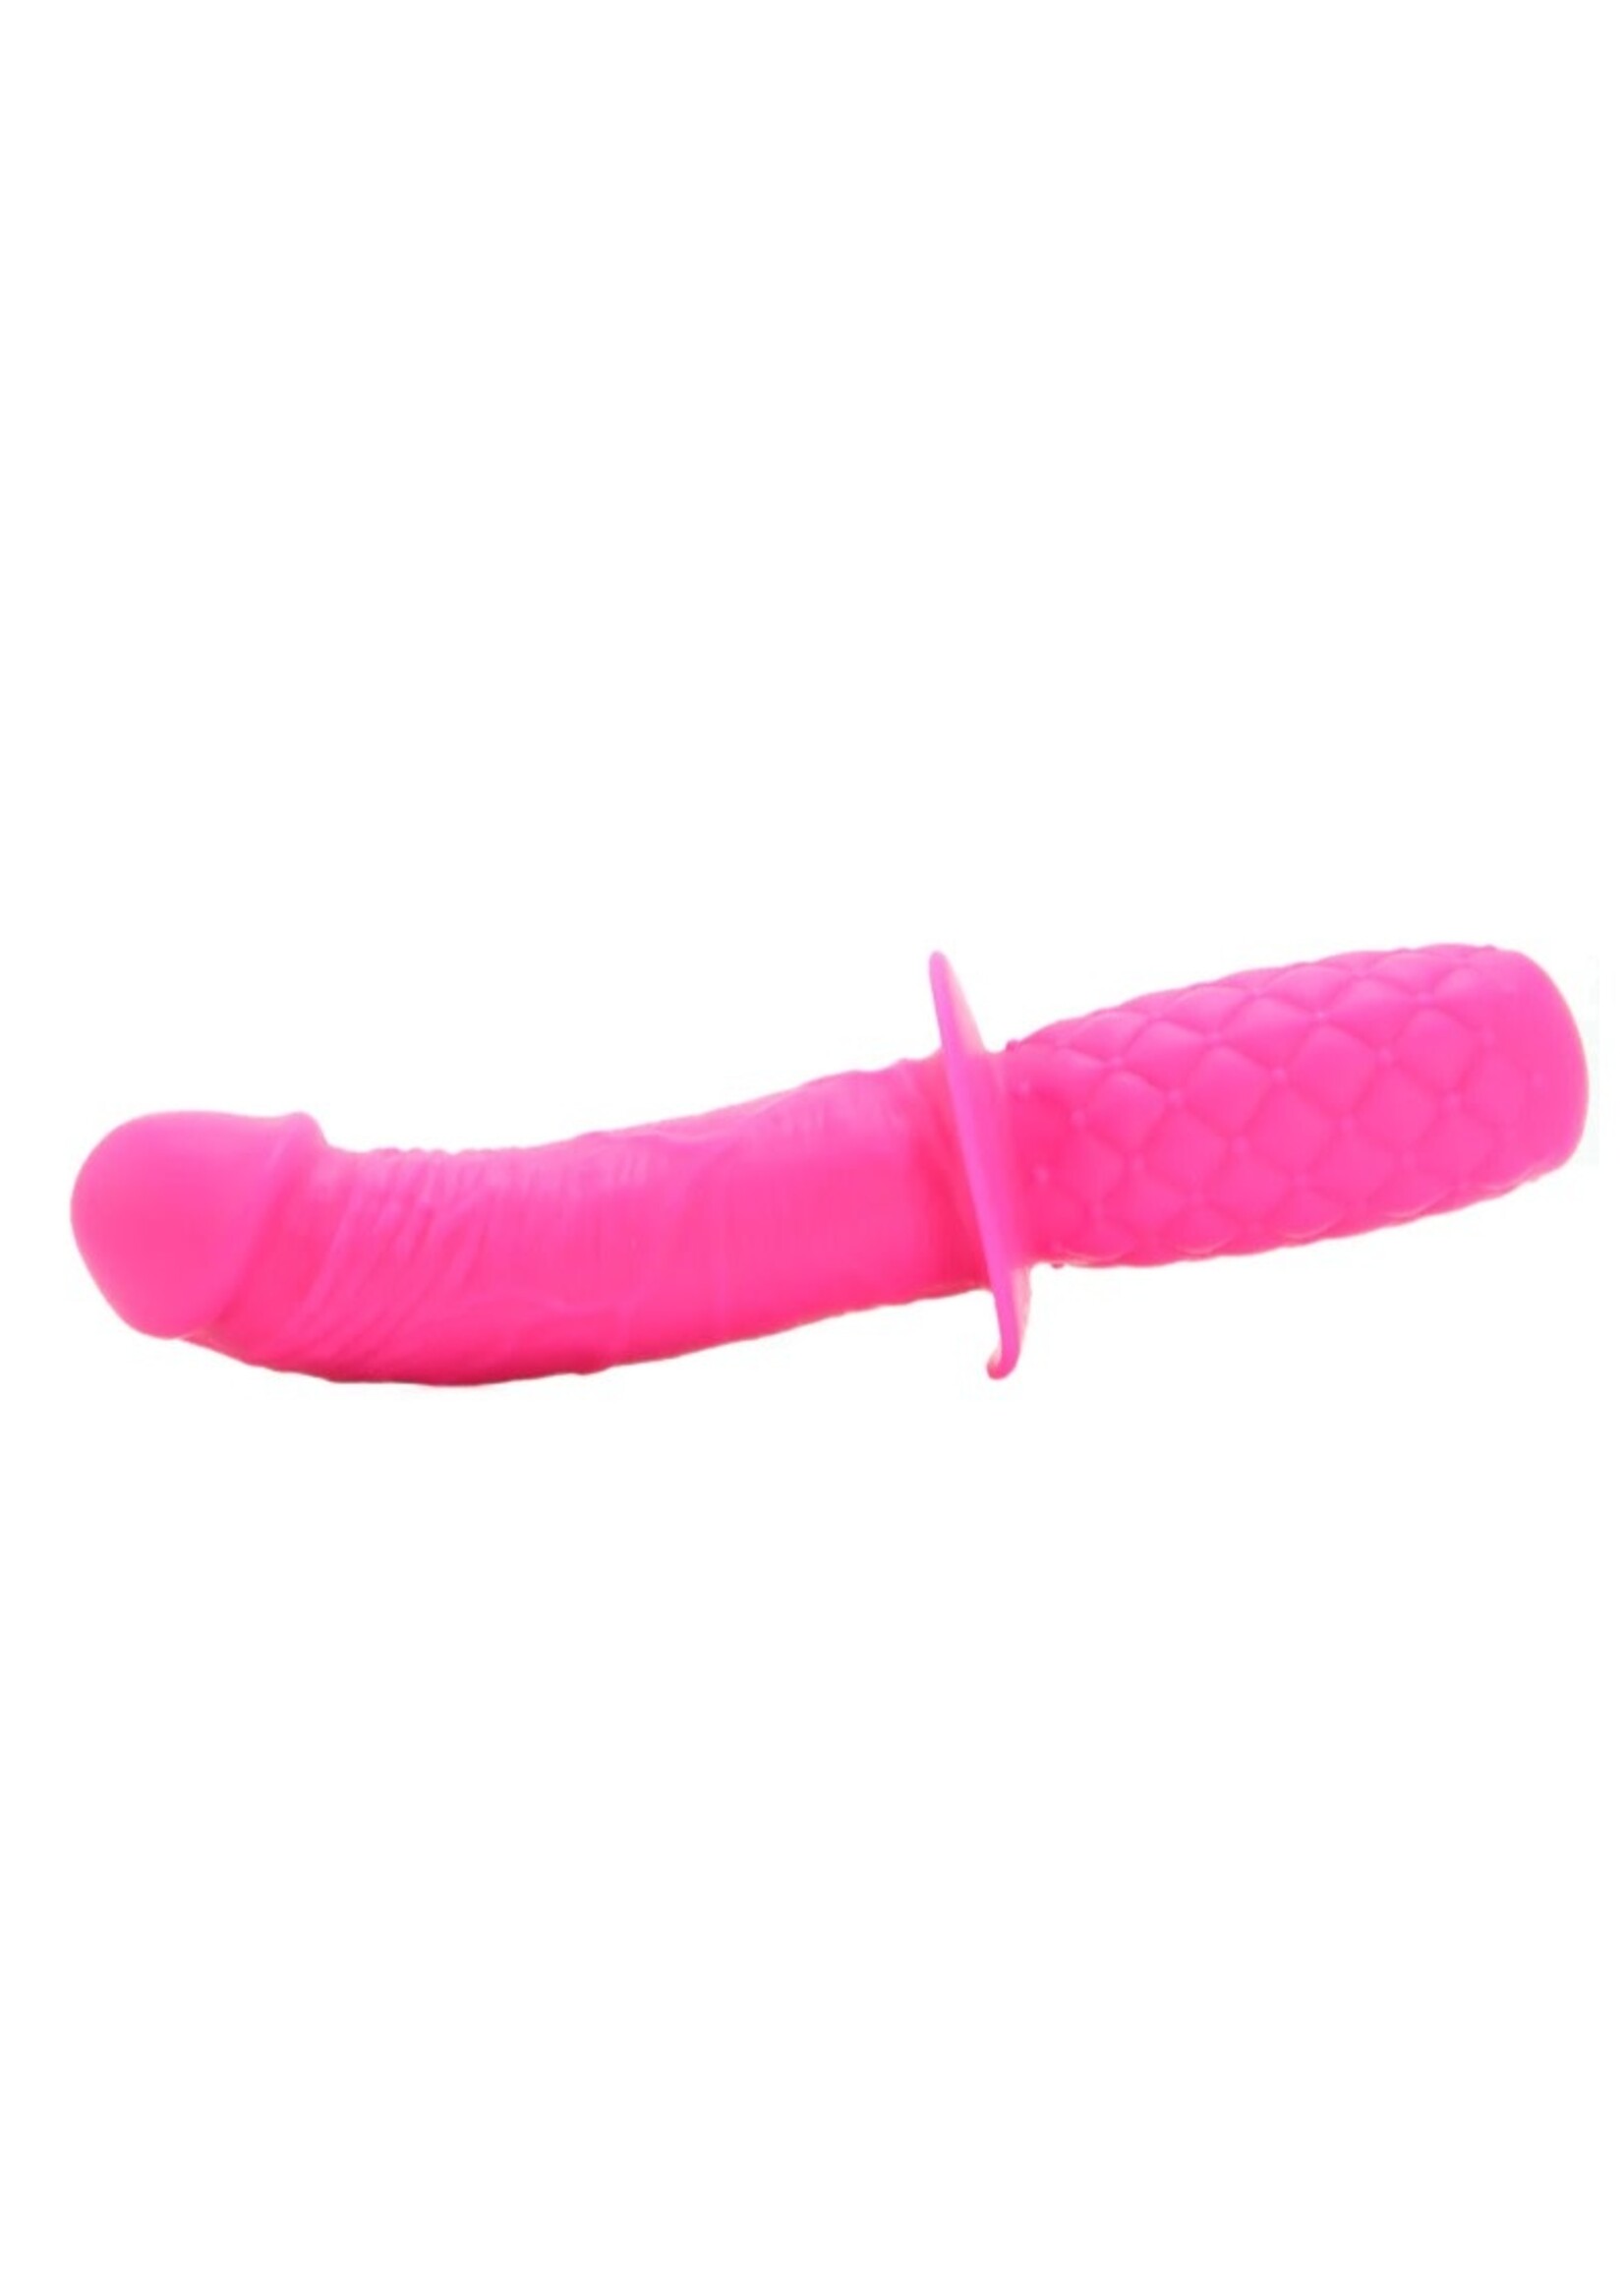 Silicone Grip G-Spot Thruster Dildo in Pink